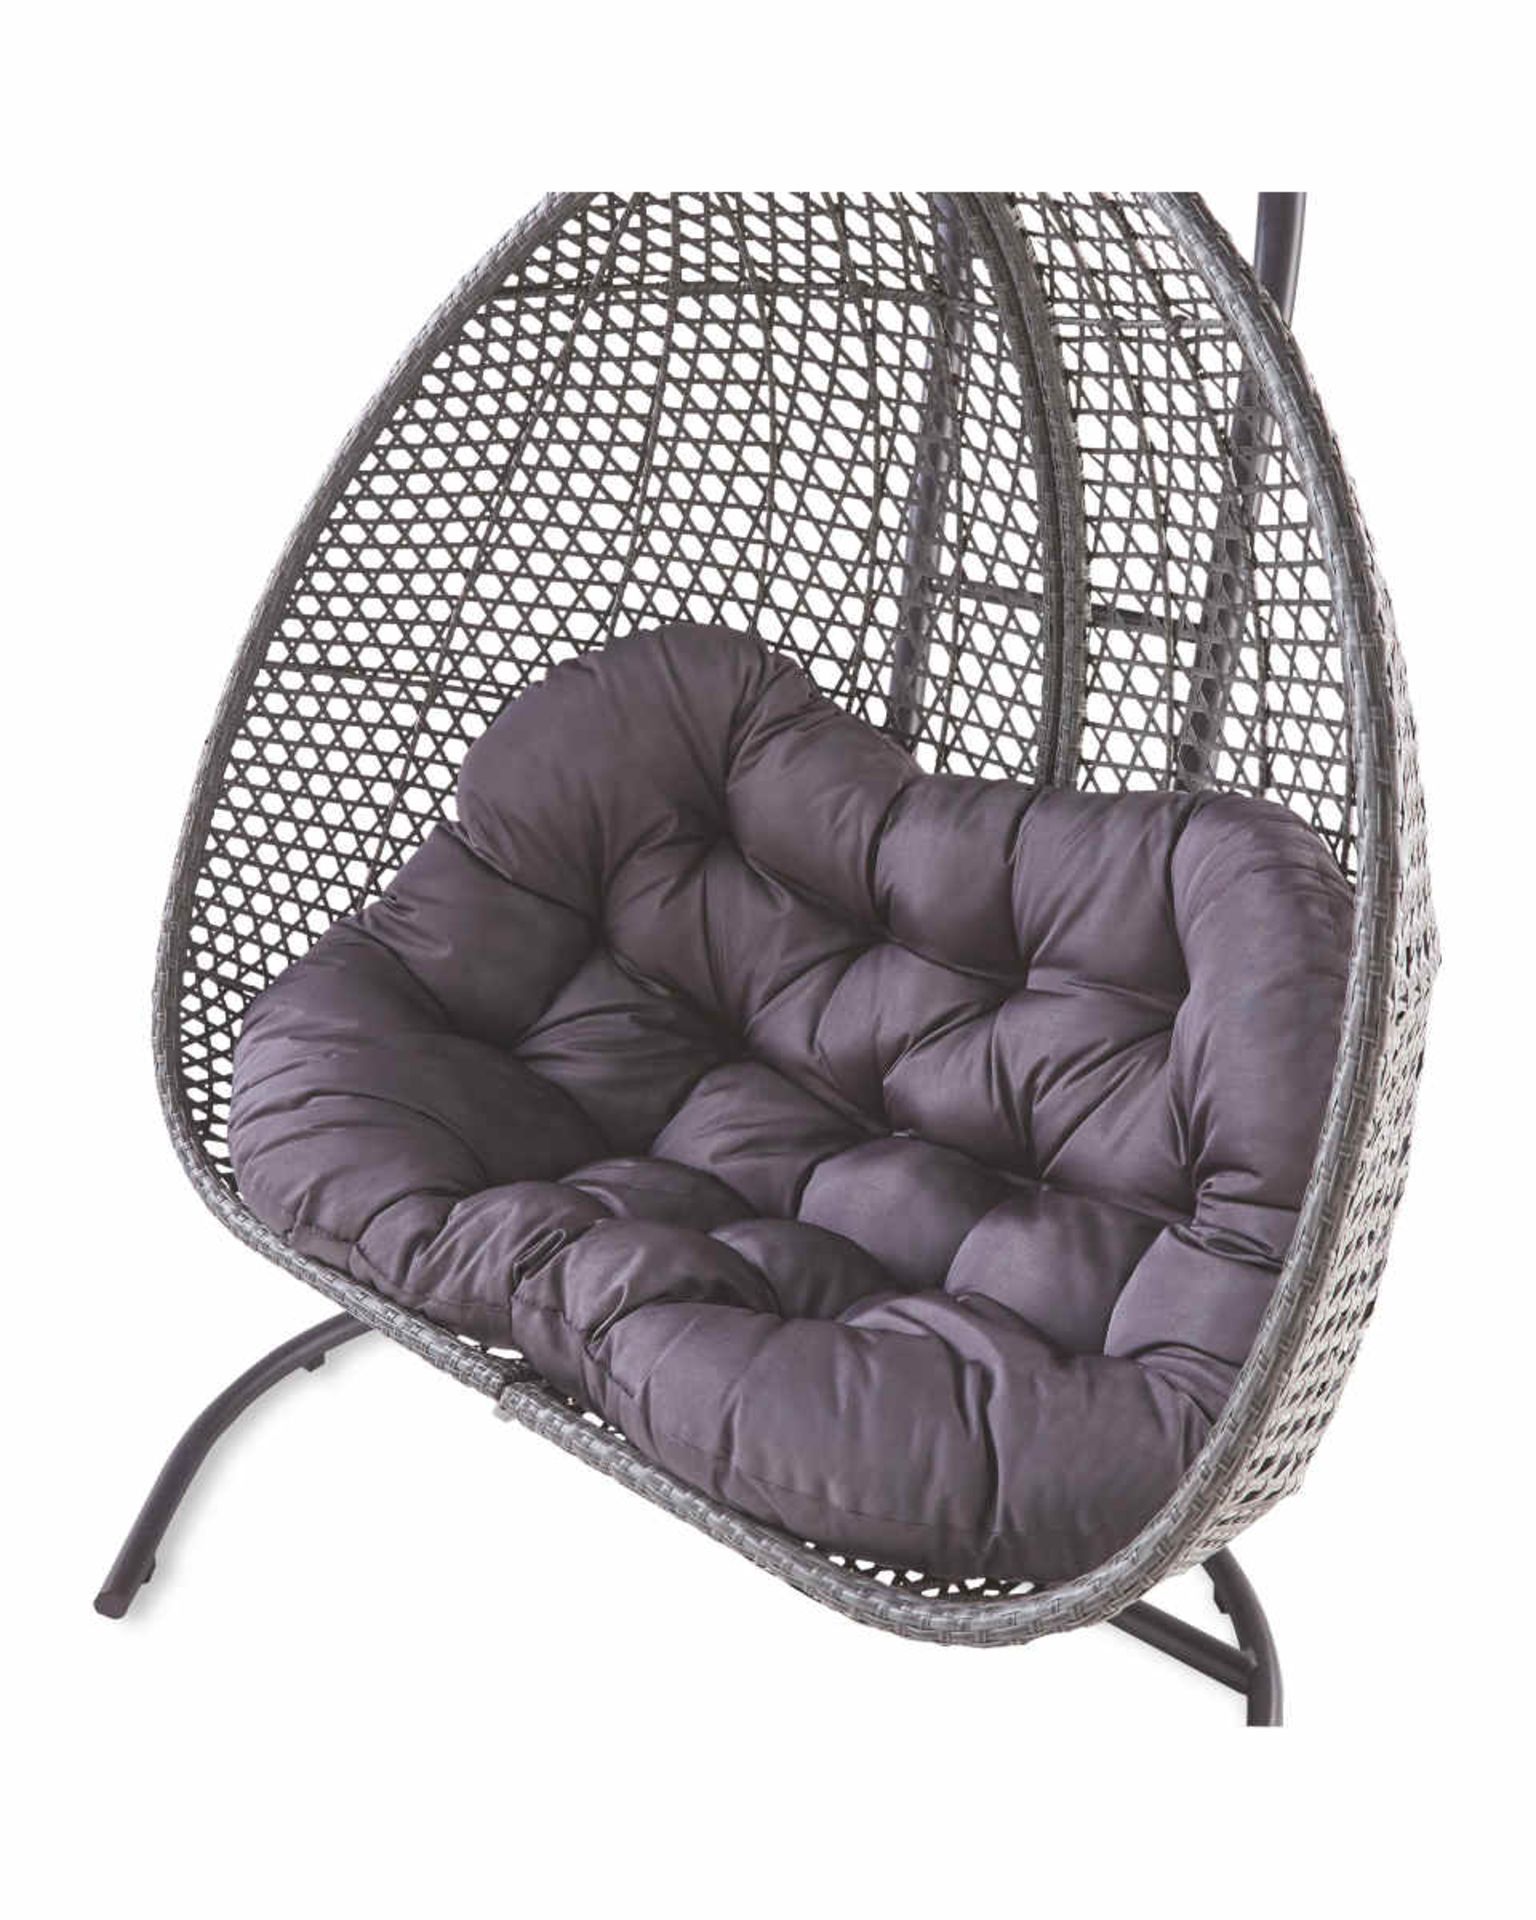 Large Hanging Egg Chair. - H/ST. This amazing Large Hanging Egg Chair is the ideal way to relax in - Image 2 of 3